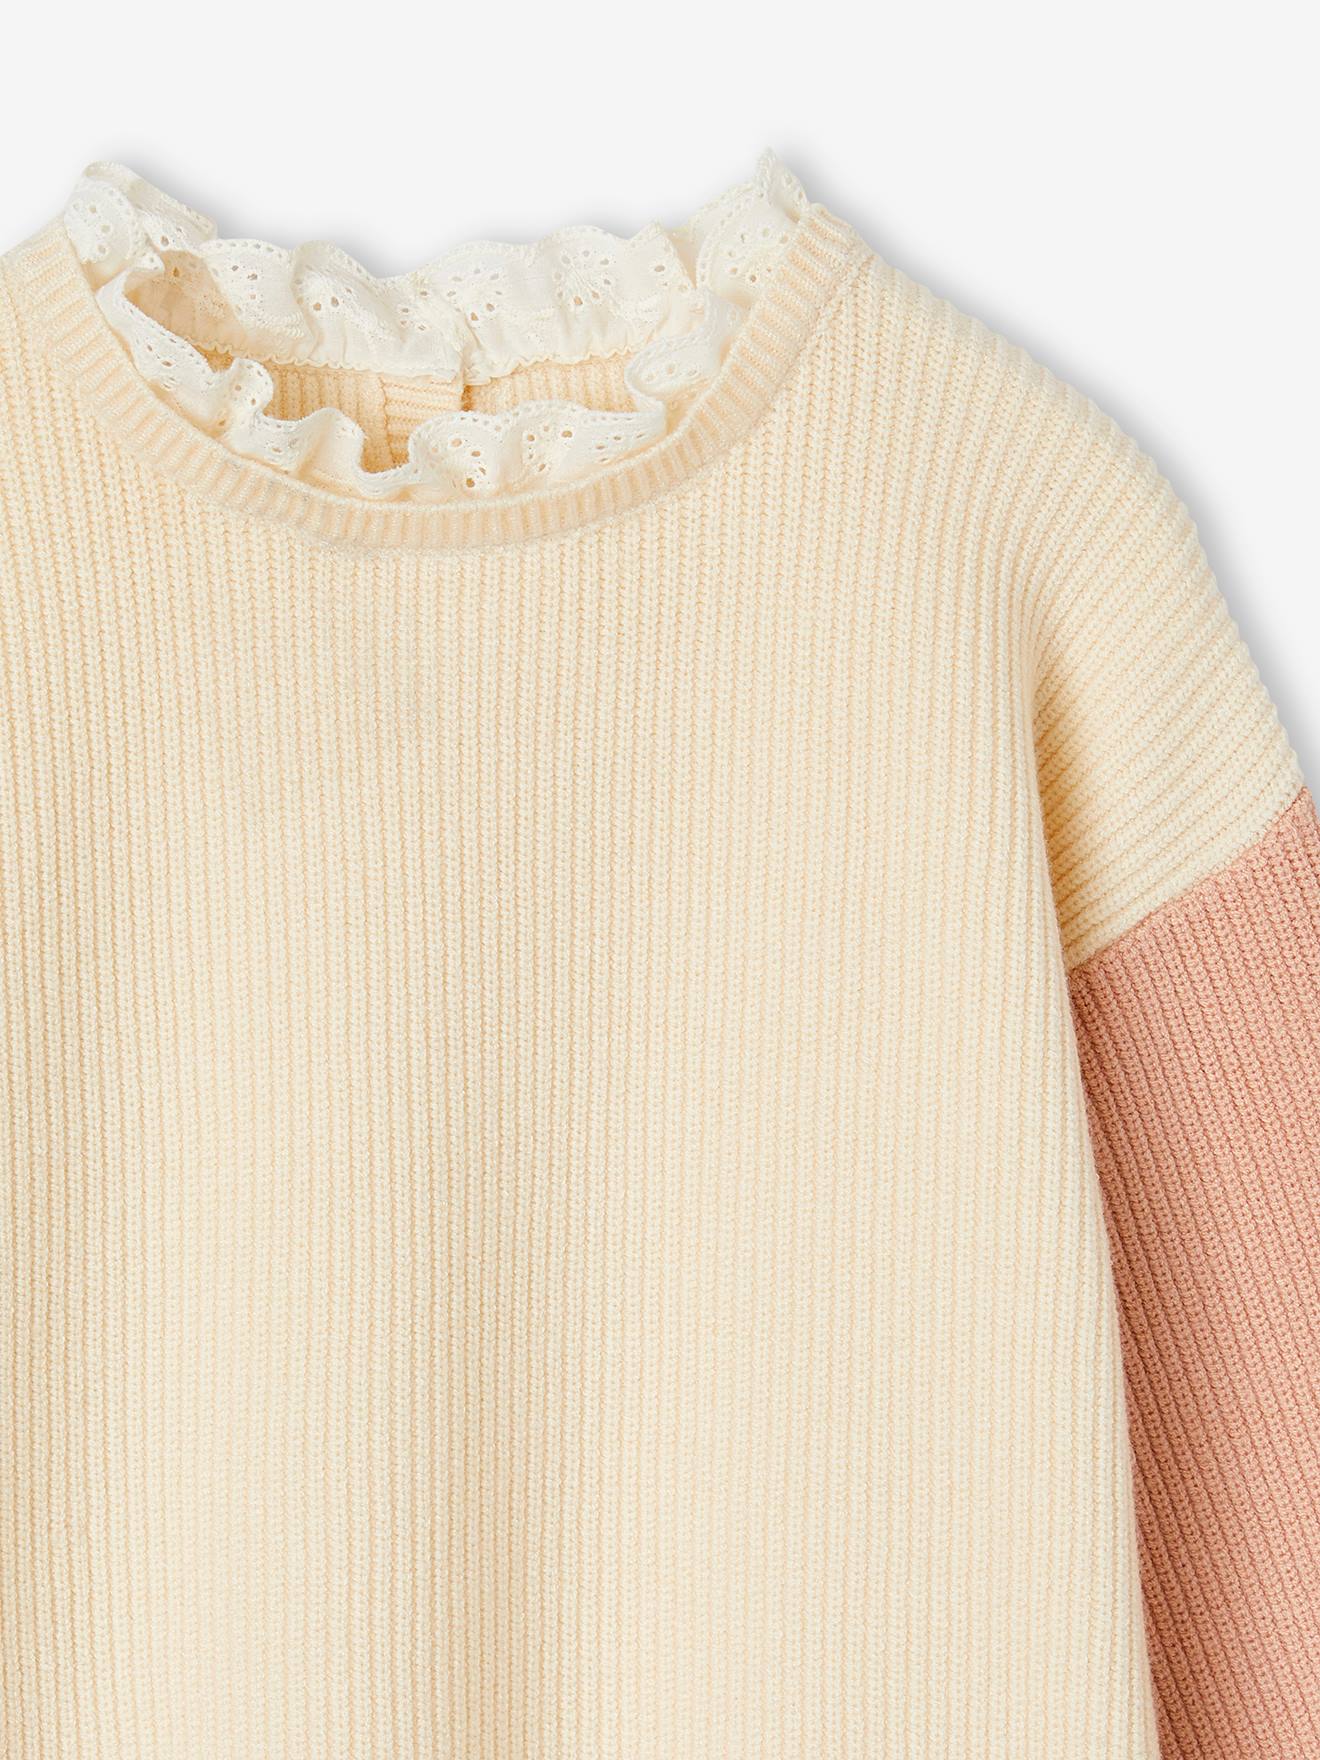 Loose-Fitting Jumper with Fancy Collar for Girls - sweet pink